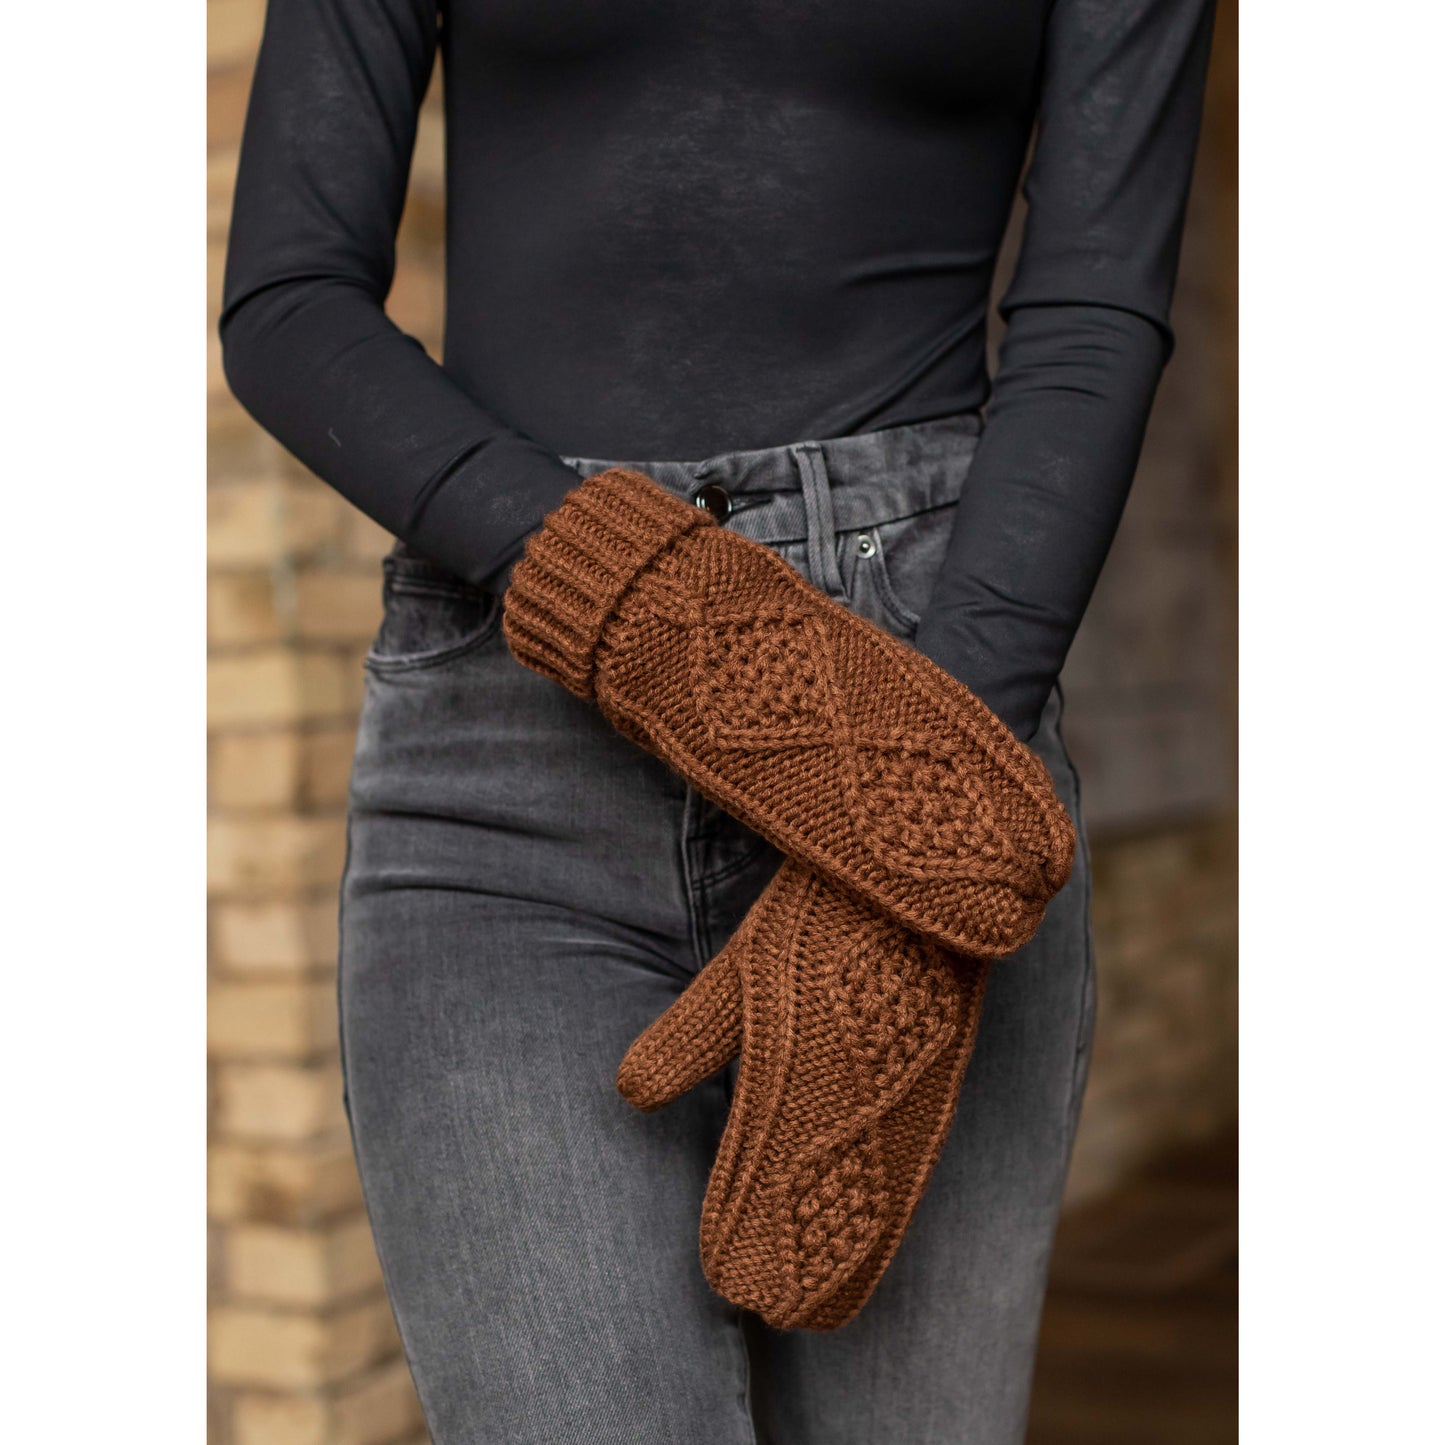 Panache Apparel Co. - Brown Cable Knit Mittens